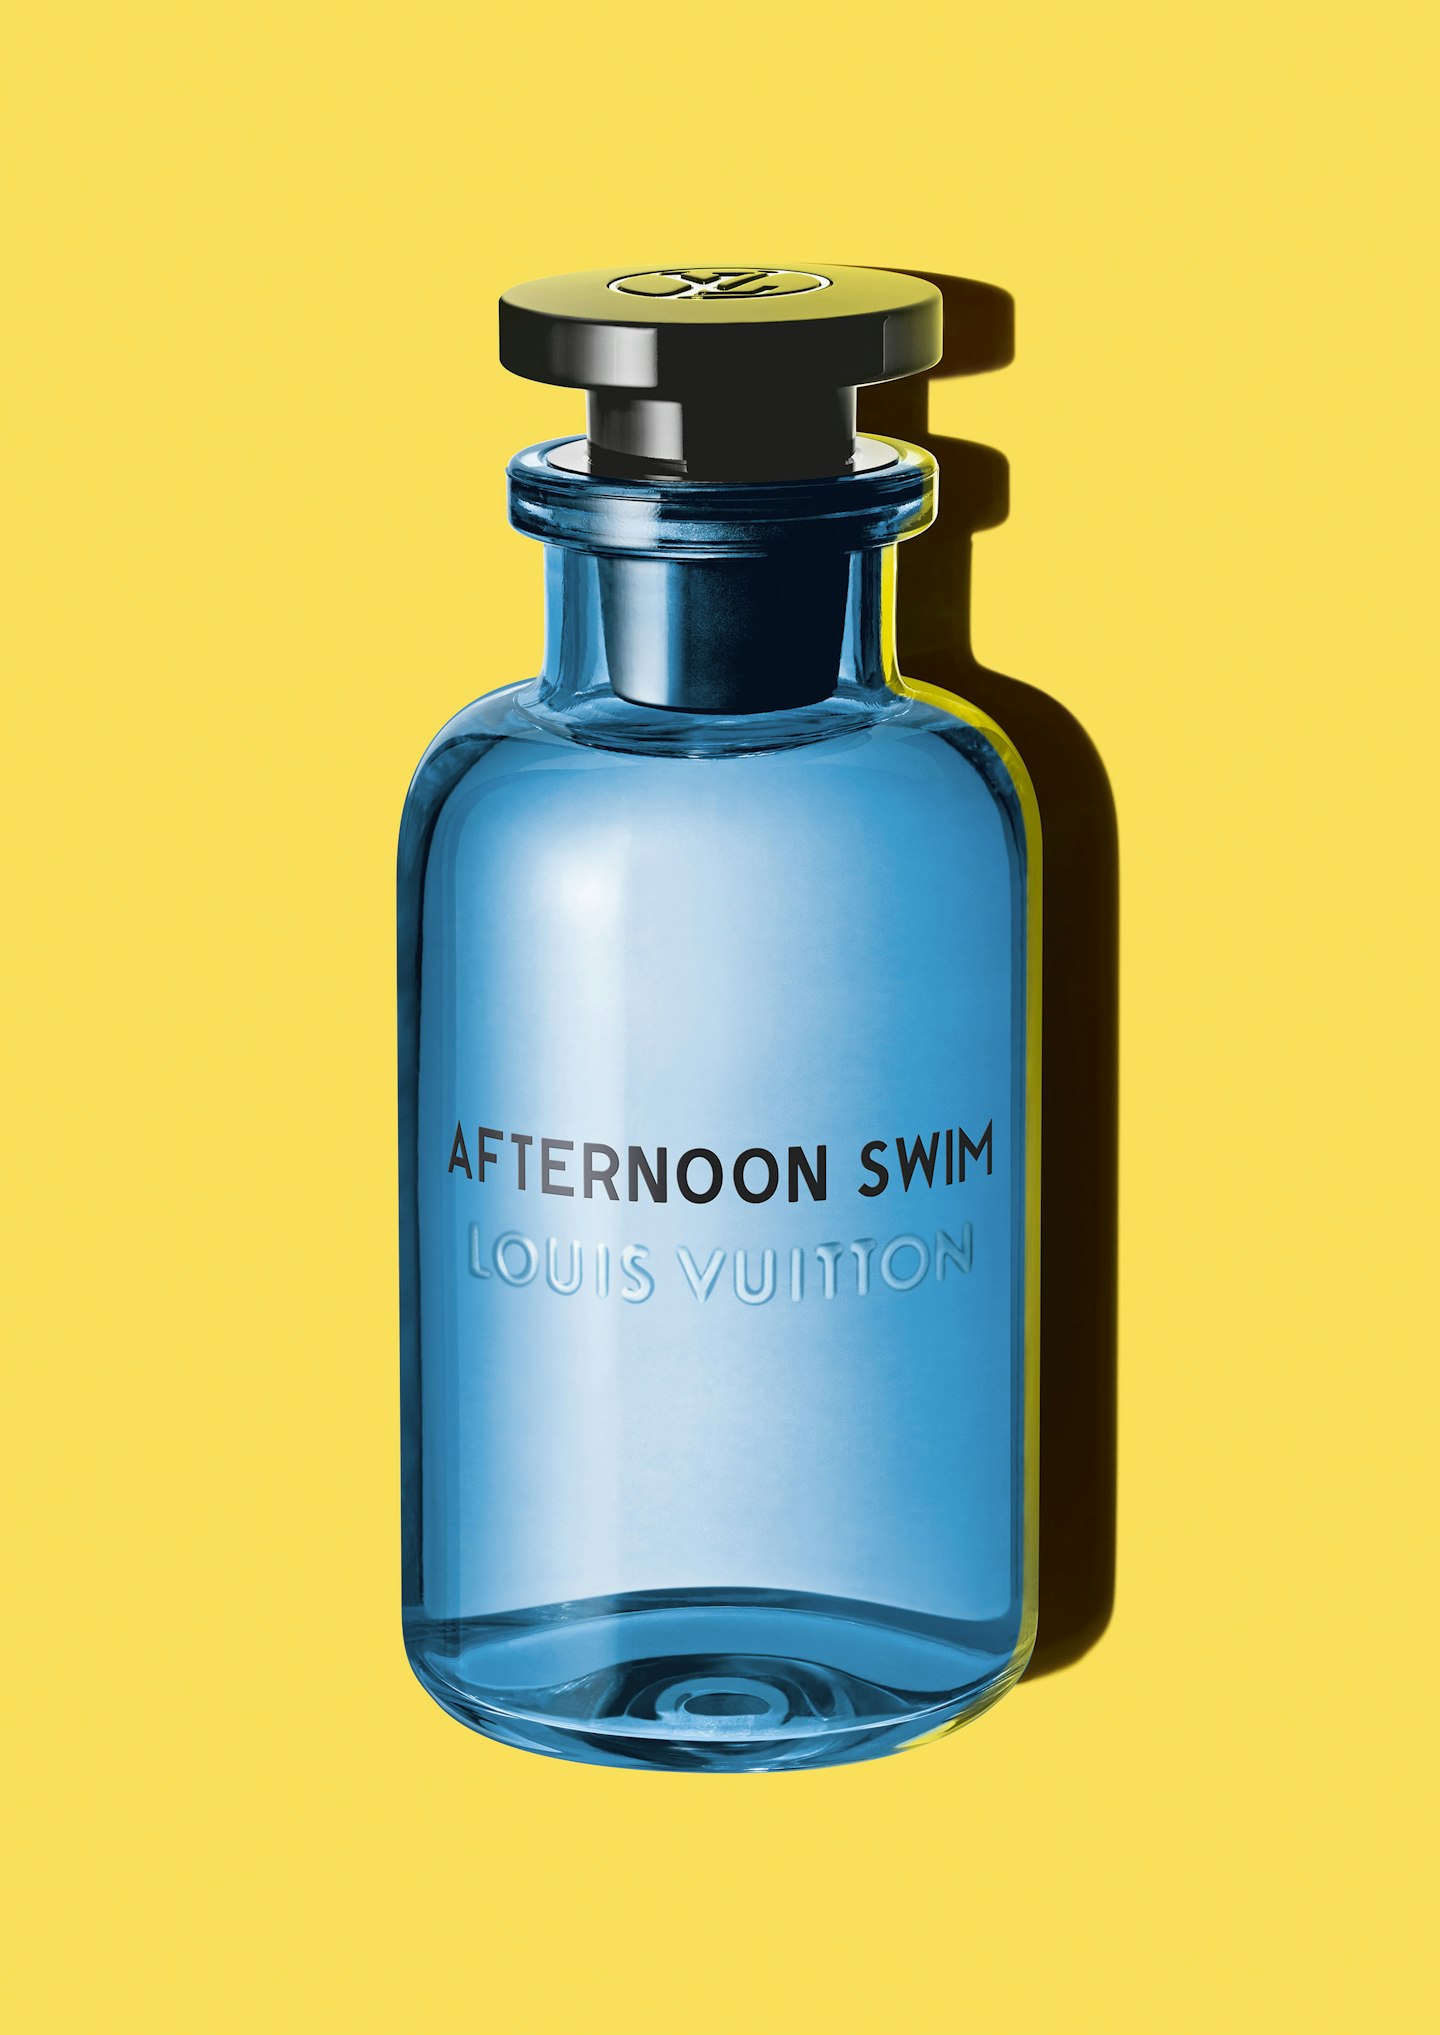 Louis Vuitton Afternoon Swim Cologne  Perfume and cologne, Louis vuitton  perfume, Fragrance cologne